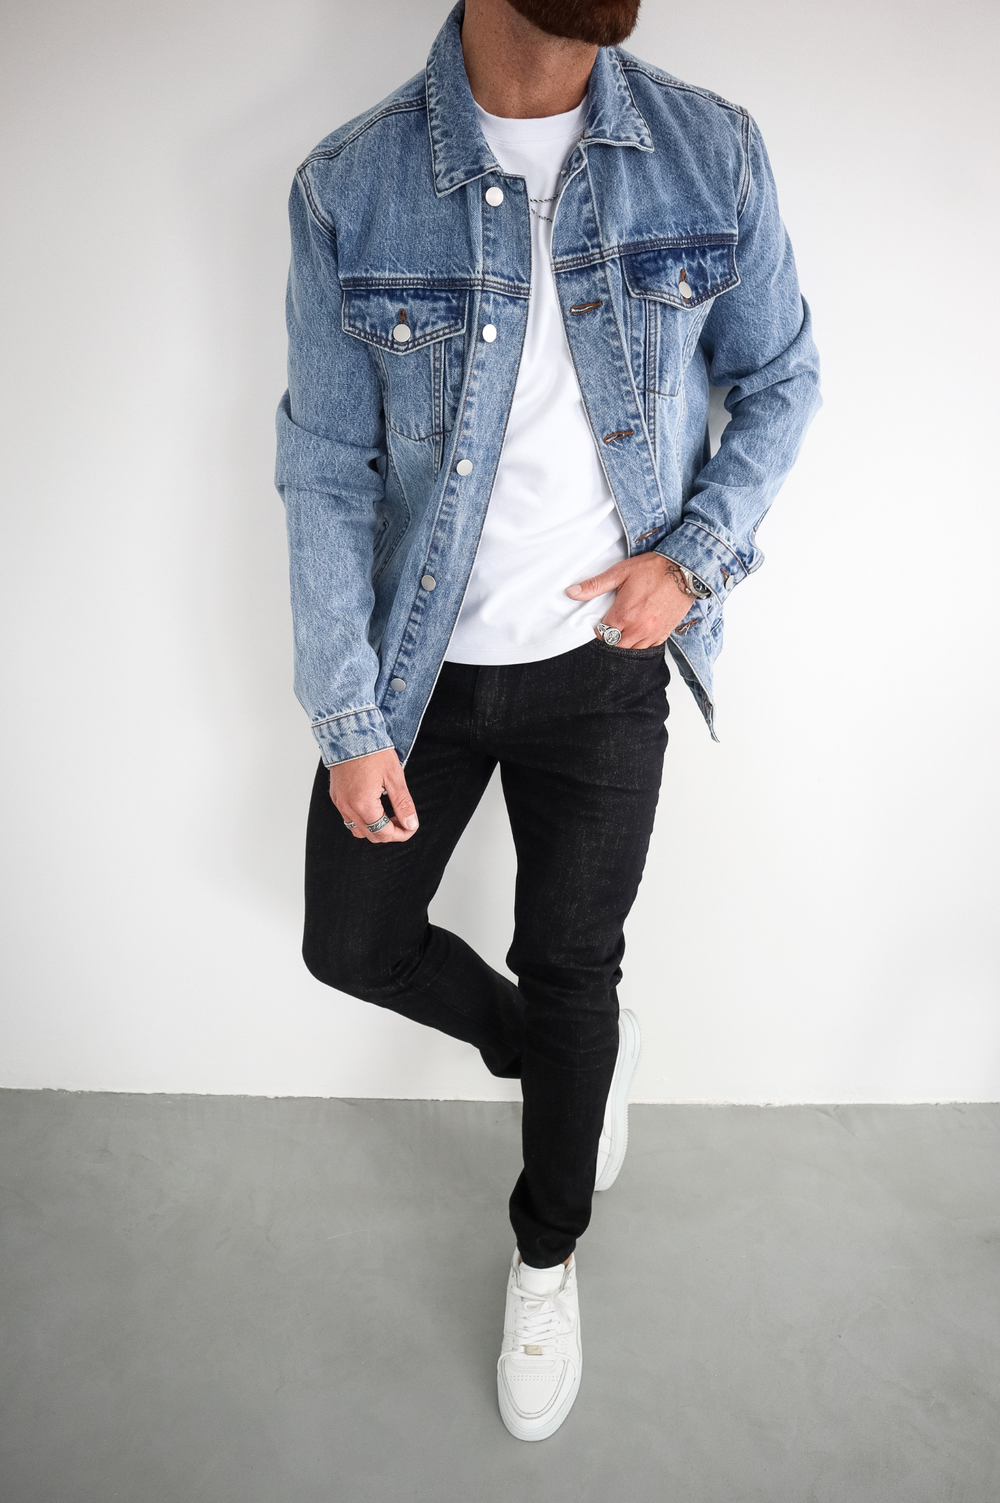 Capo DENIM Jacket - Blue – CAPO | Meaning Behind The Brand